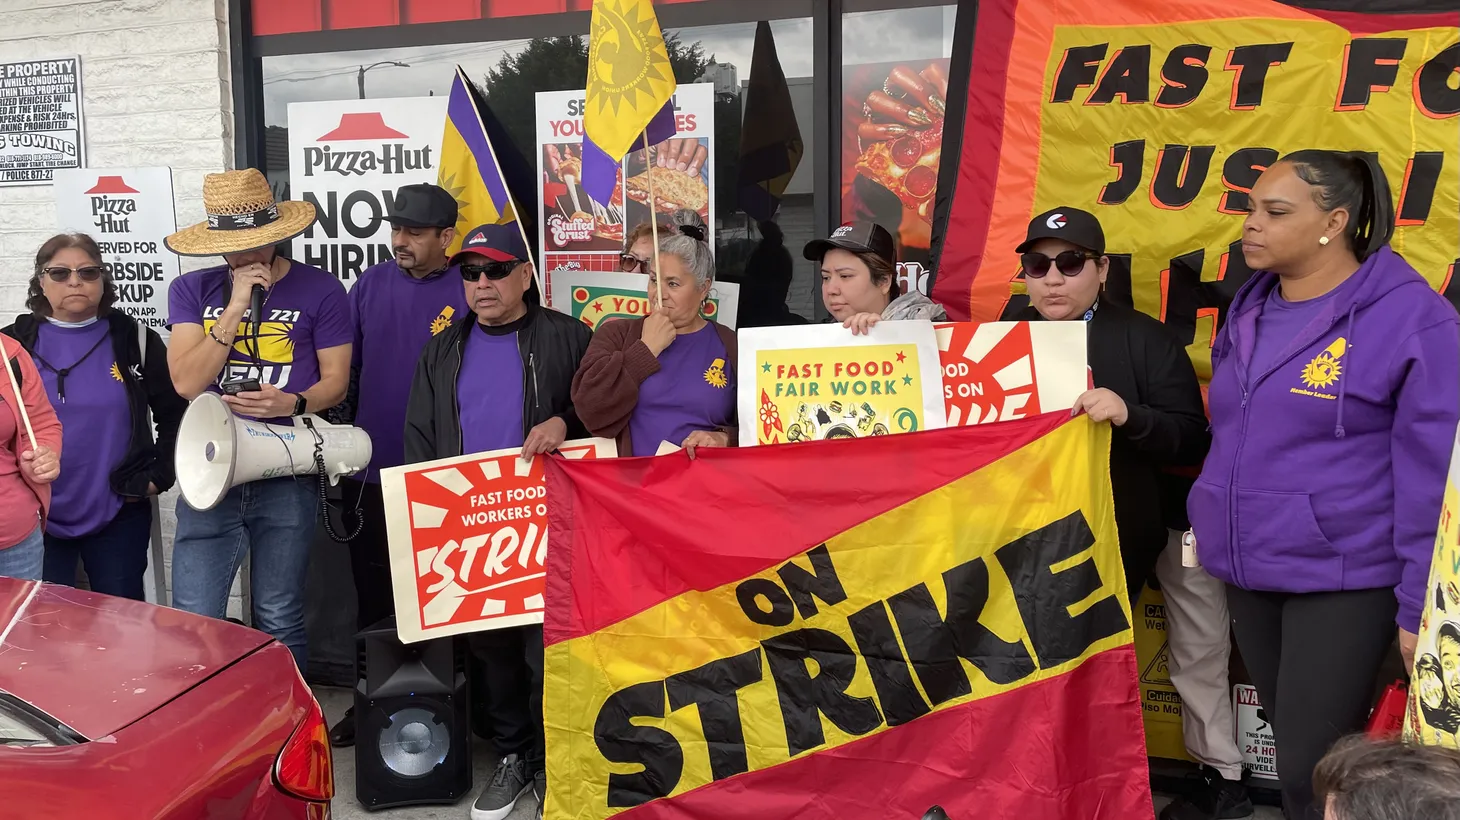 Workers at a Pizza Hut in LA’s Historic Filipinotown went on strike in March over workers’ rights. Fast food workers like them will begin receiving a $20 minimum wage once a new California law goes into effect on April 1.